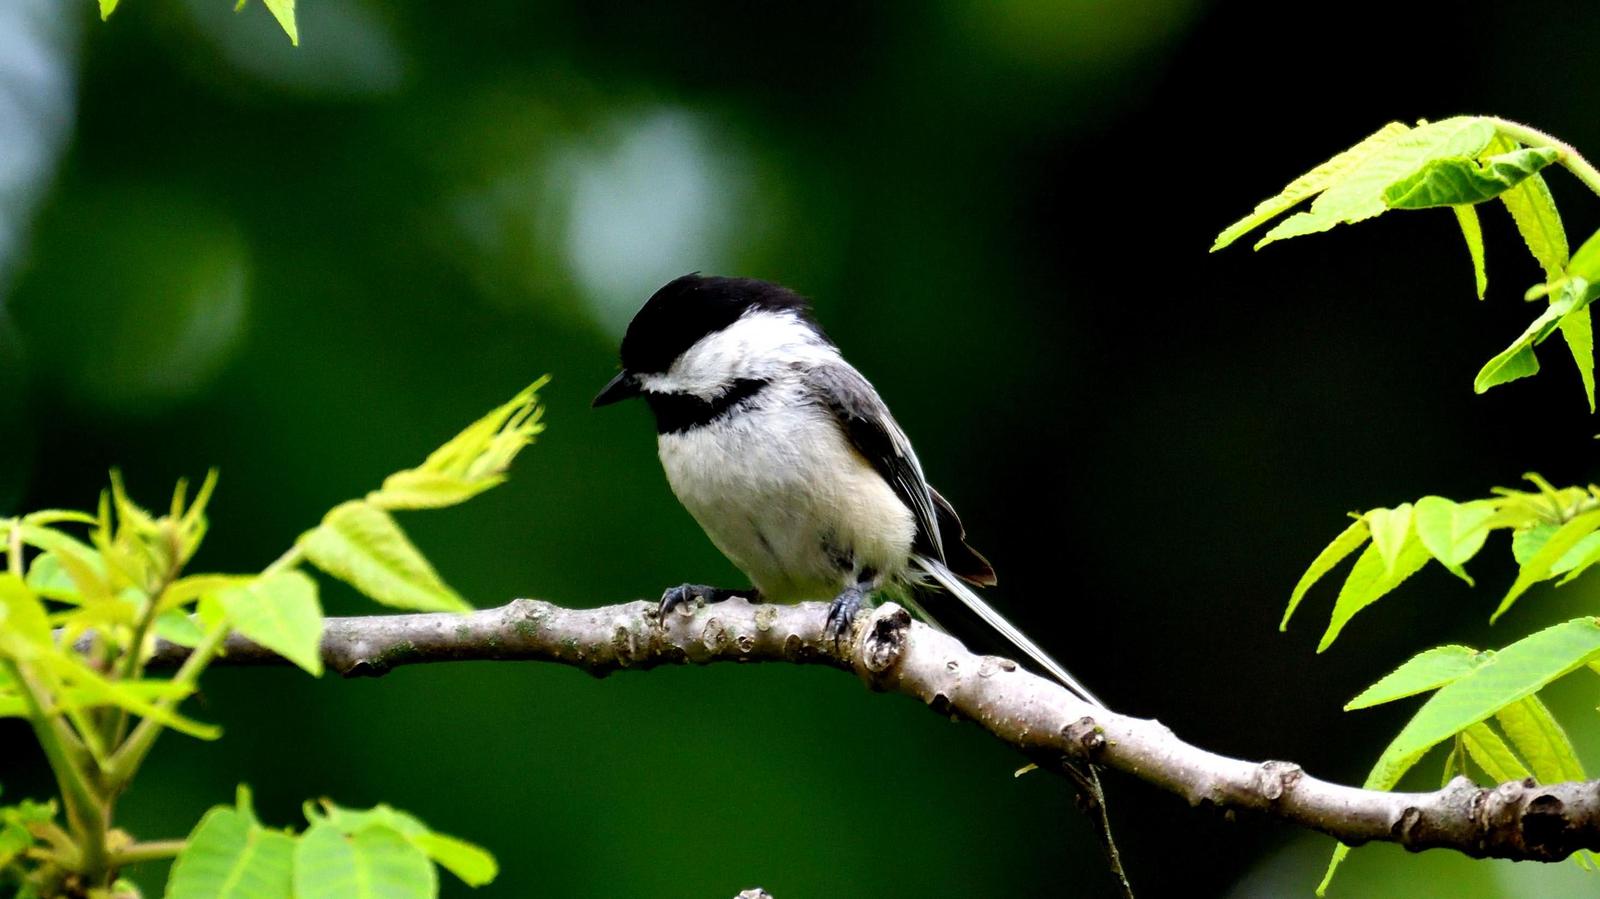 Black-capped Chickadee Photo by RM Beck